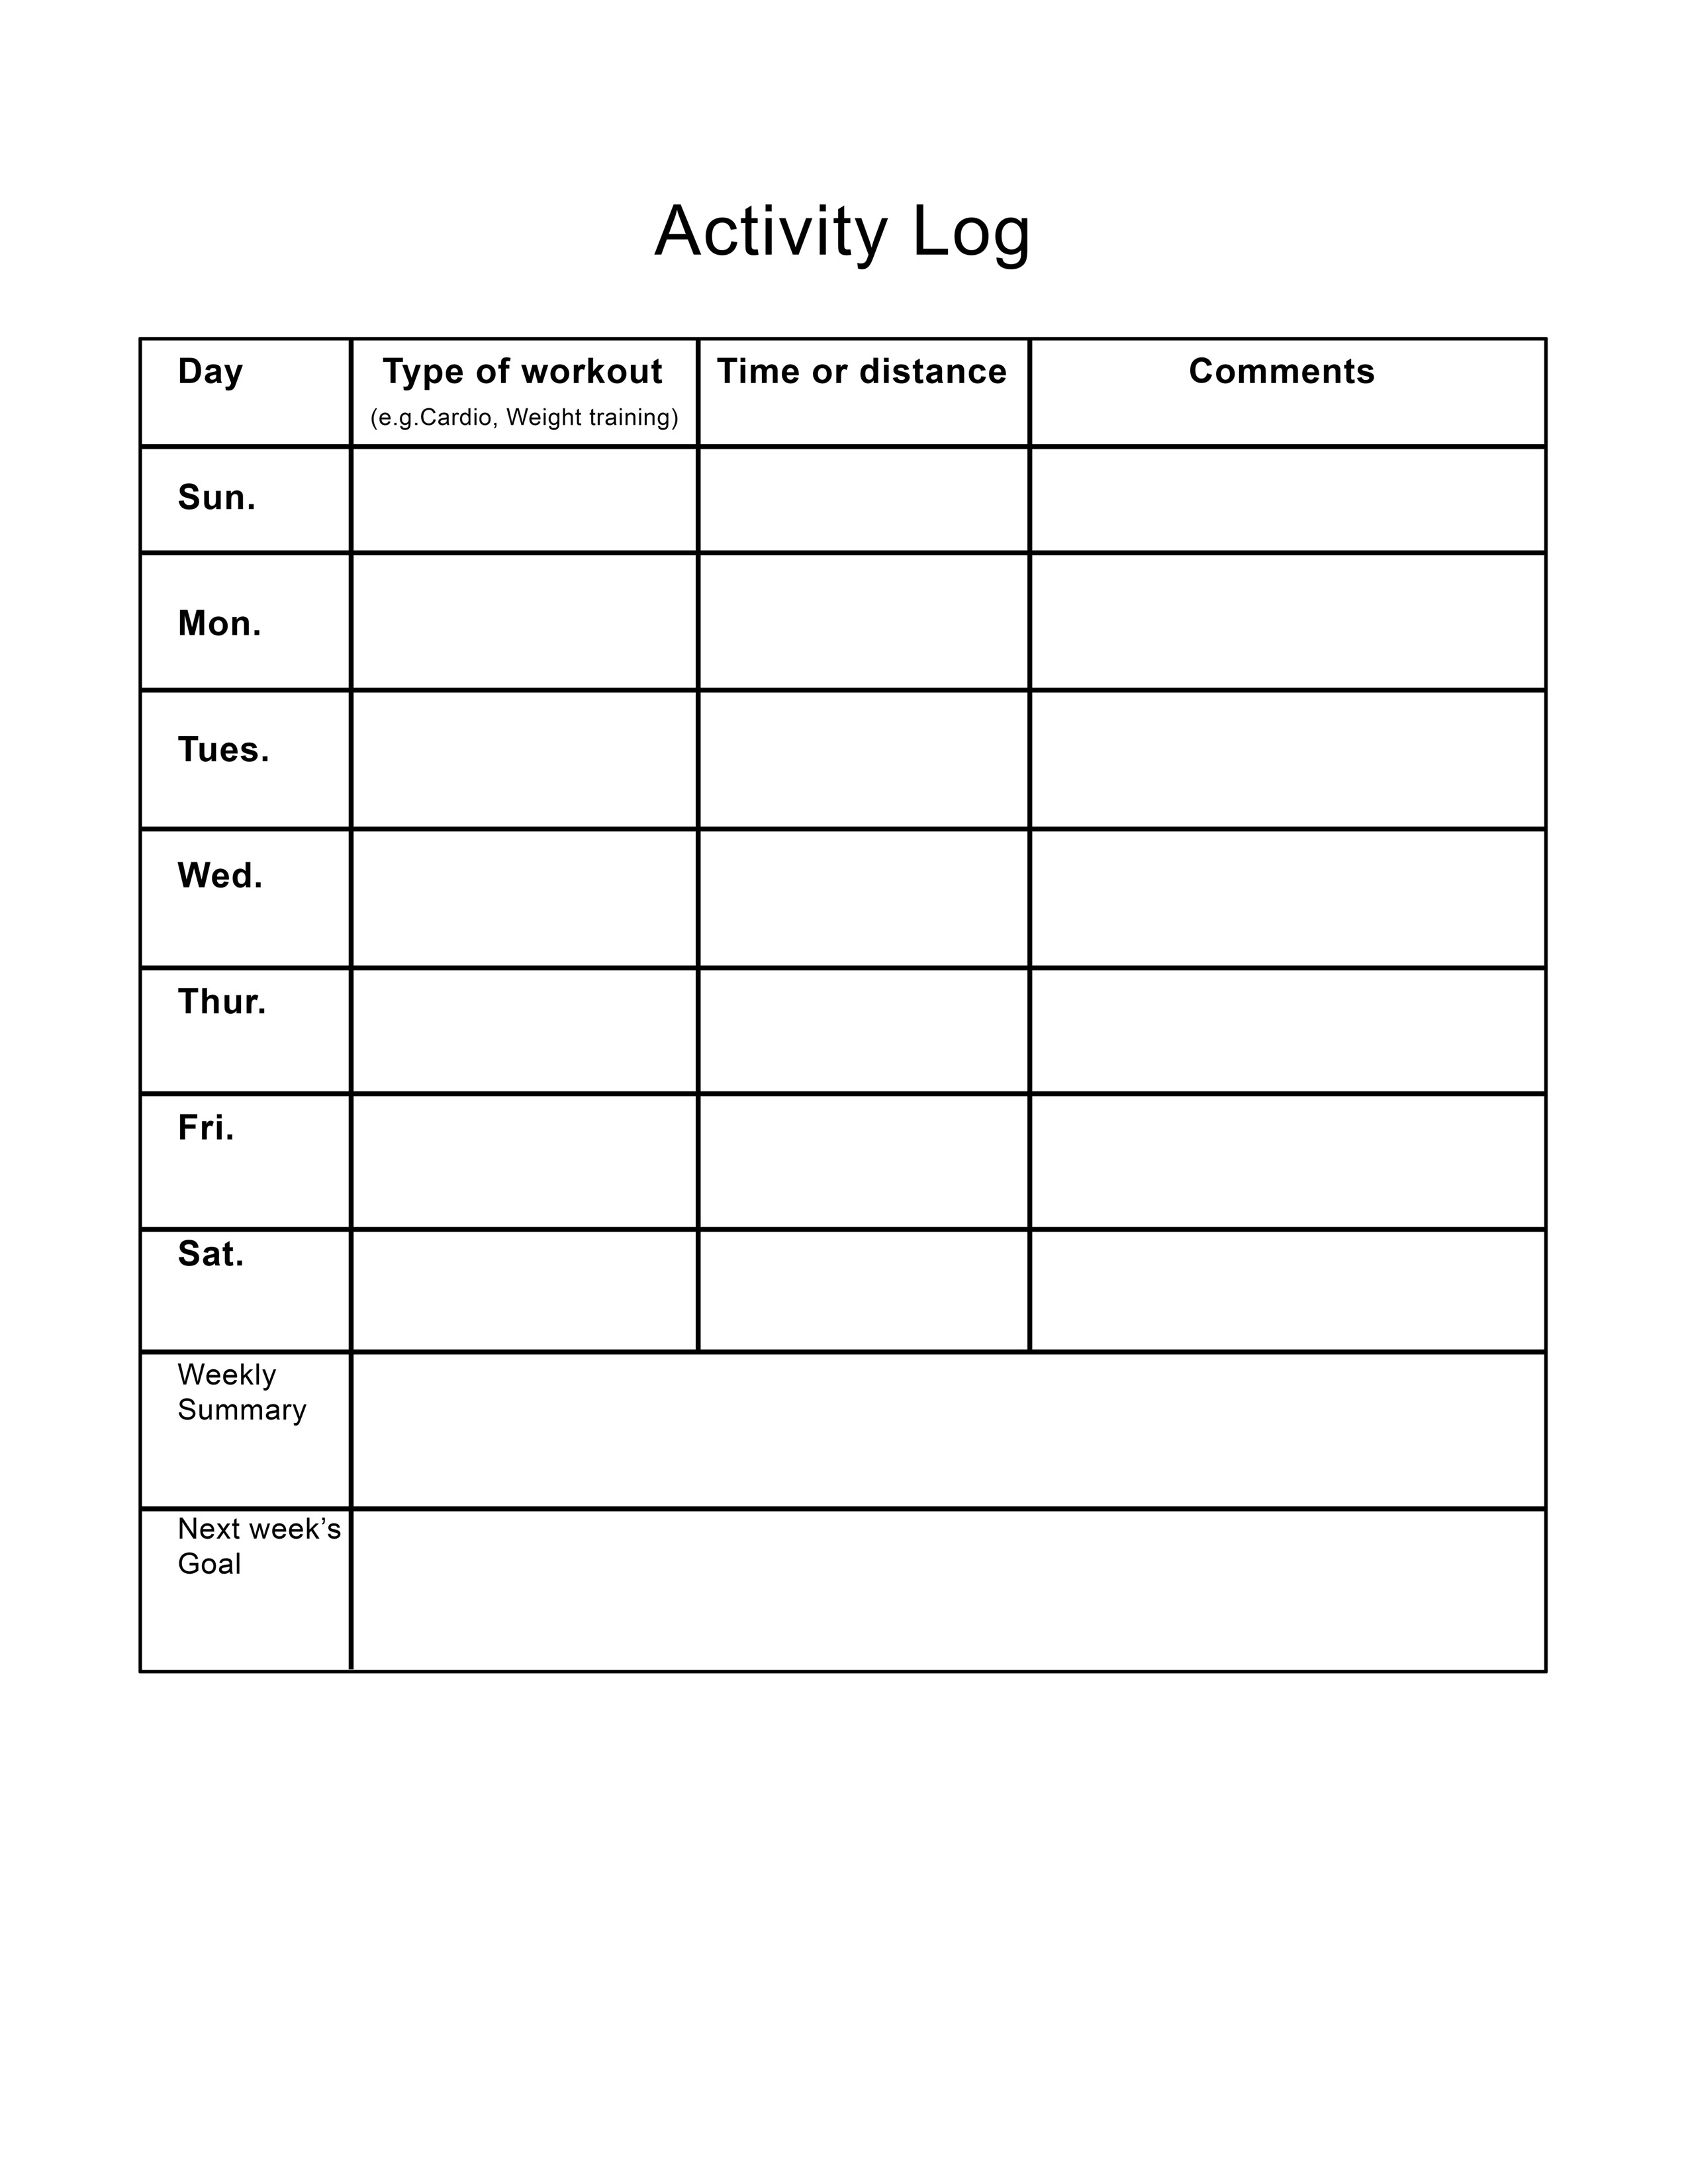 Exercise activity log sheet you can download and print up to 11 by 8 inches.